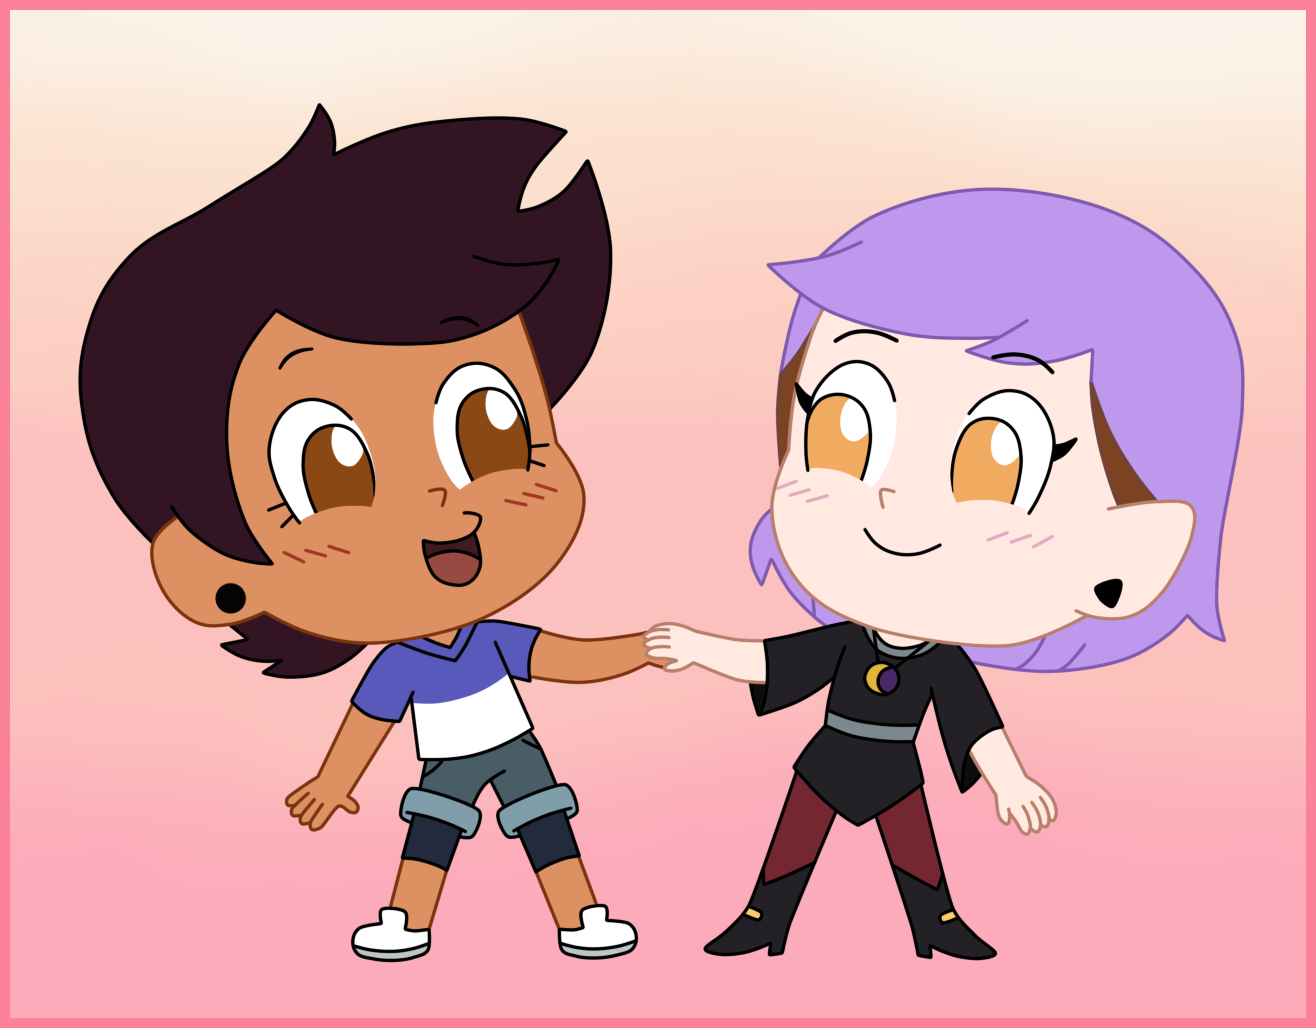 Lumity is a nice romance in Chibi Tiny Tales by Deaf-Machbot on DeviantArt